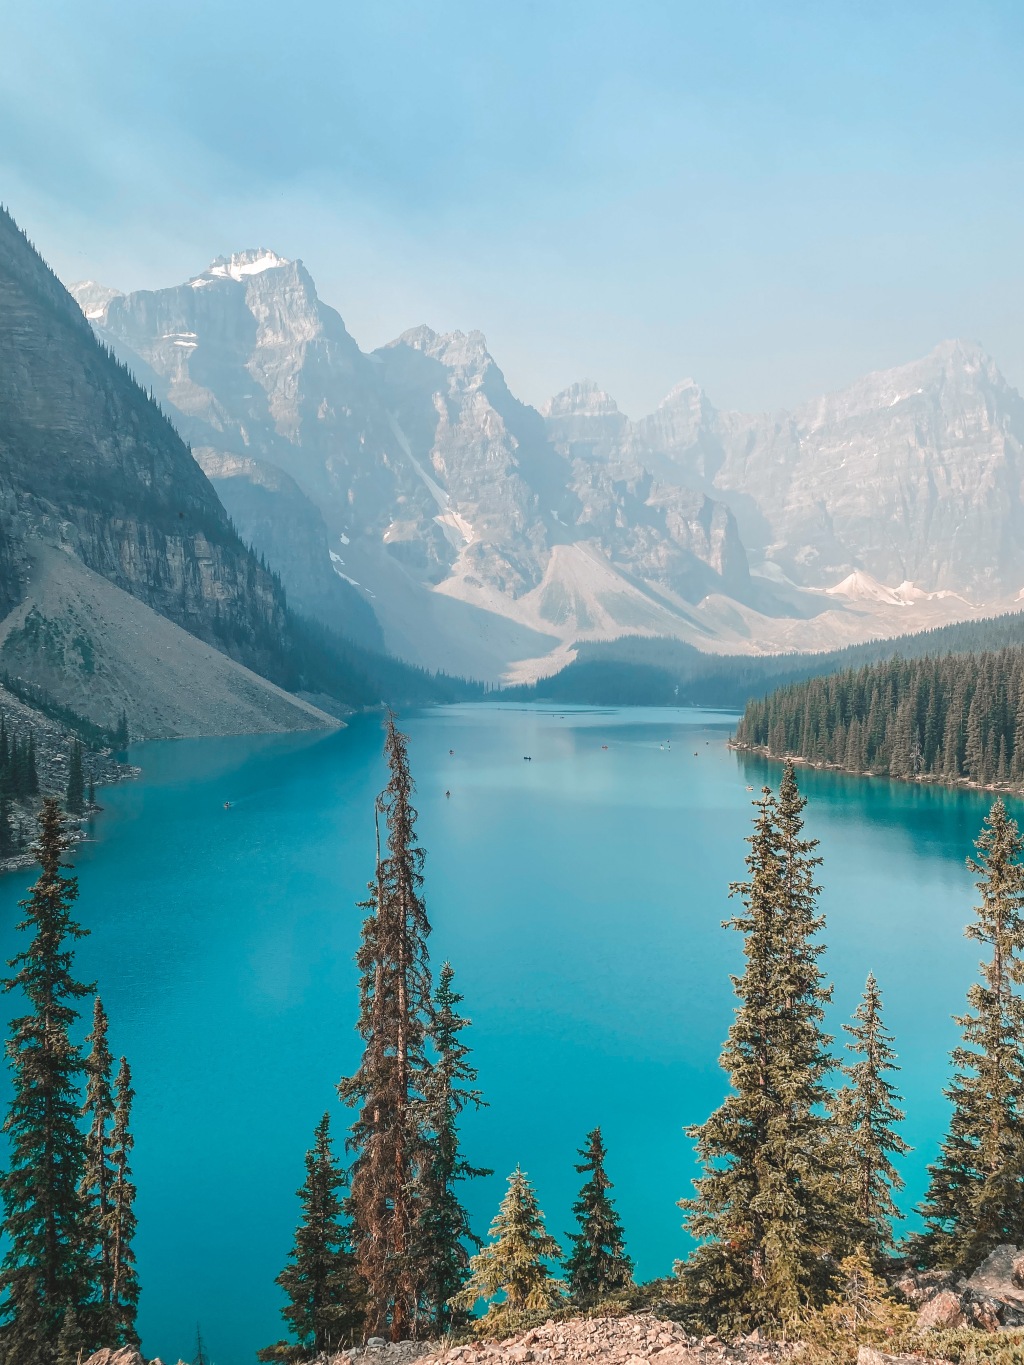 6 Best Places to Visit in Banff National Park, Canada